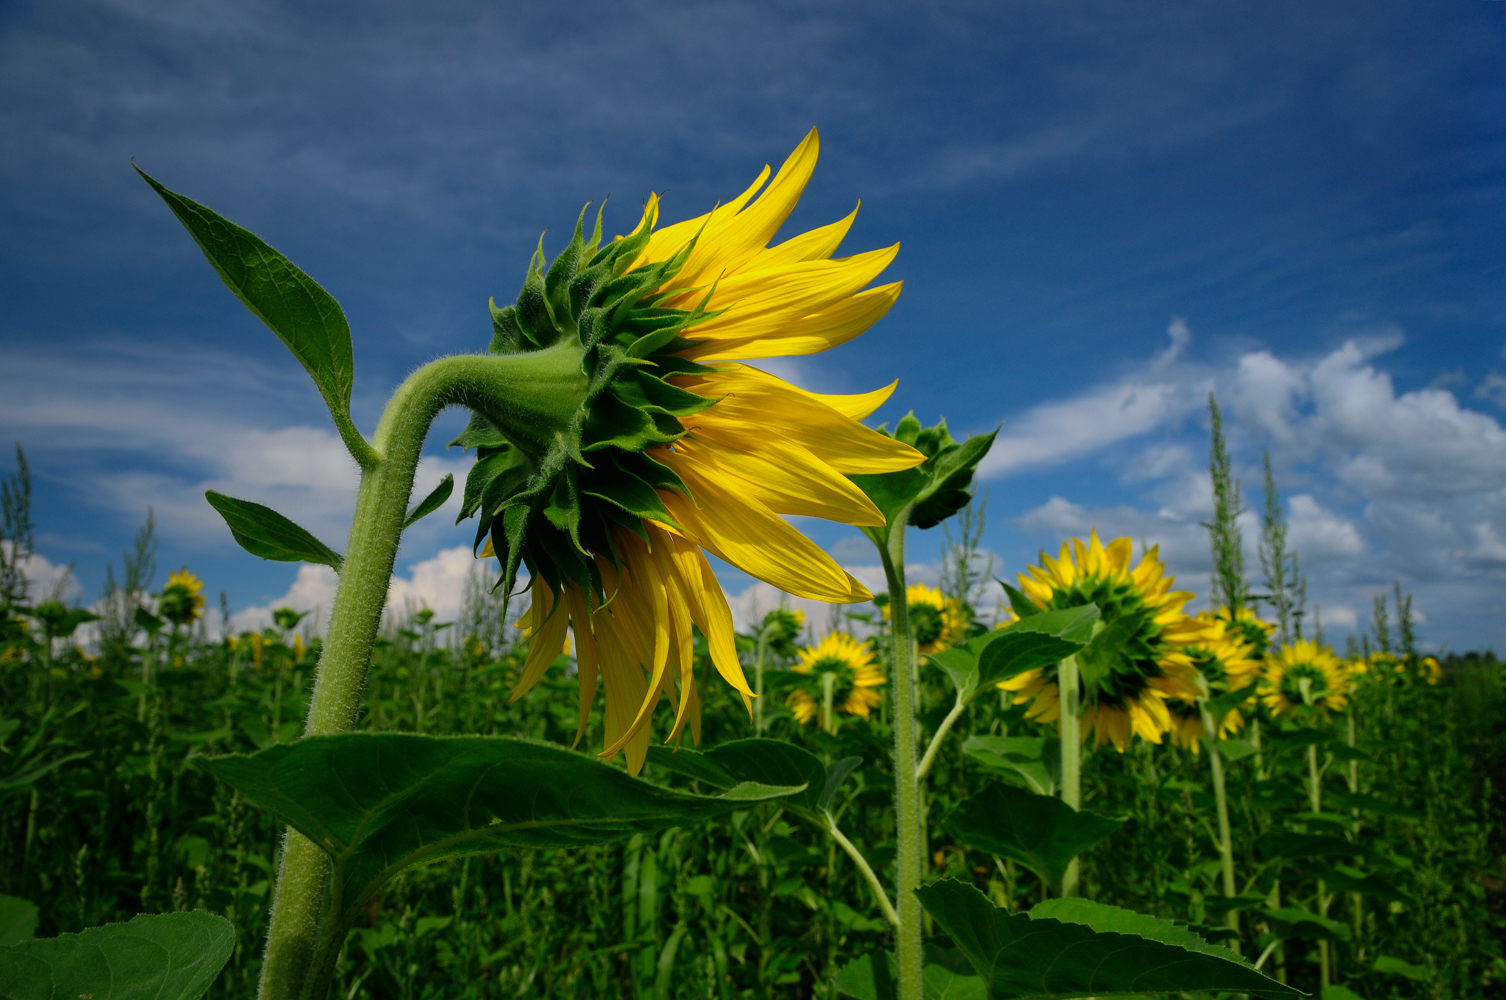 This sunflower field is between Canandaigua and Seneca Lakes, in Ontario County, NY.